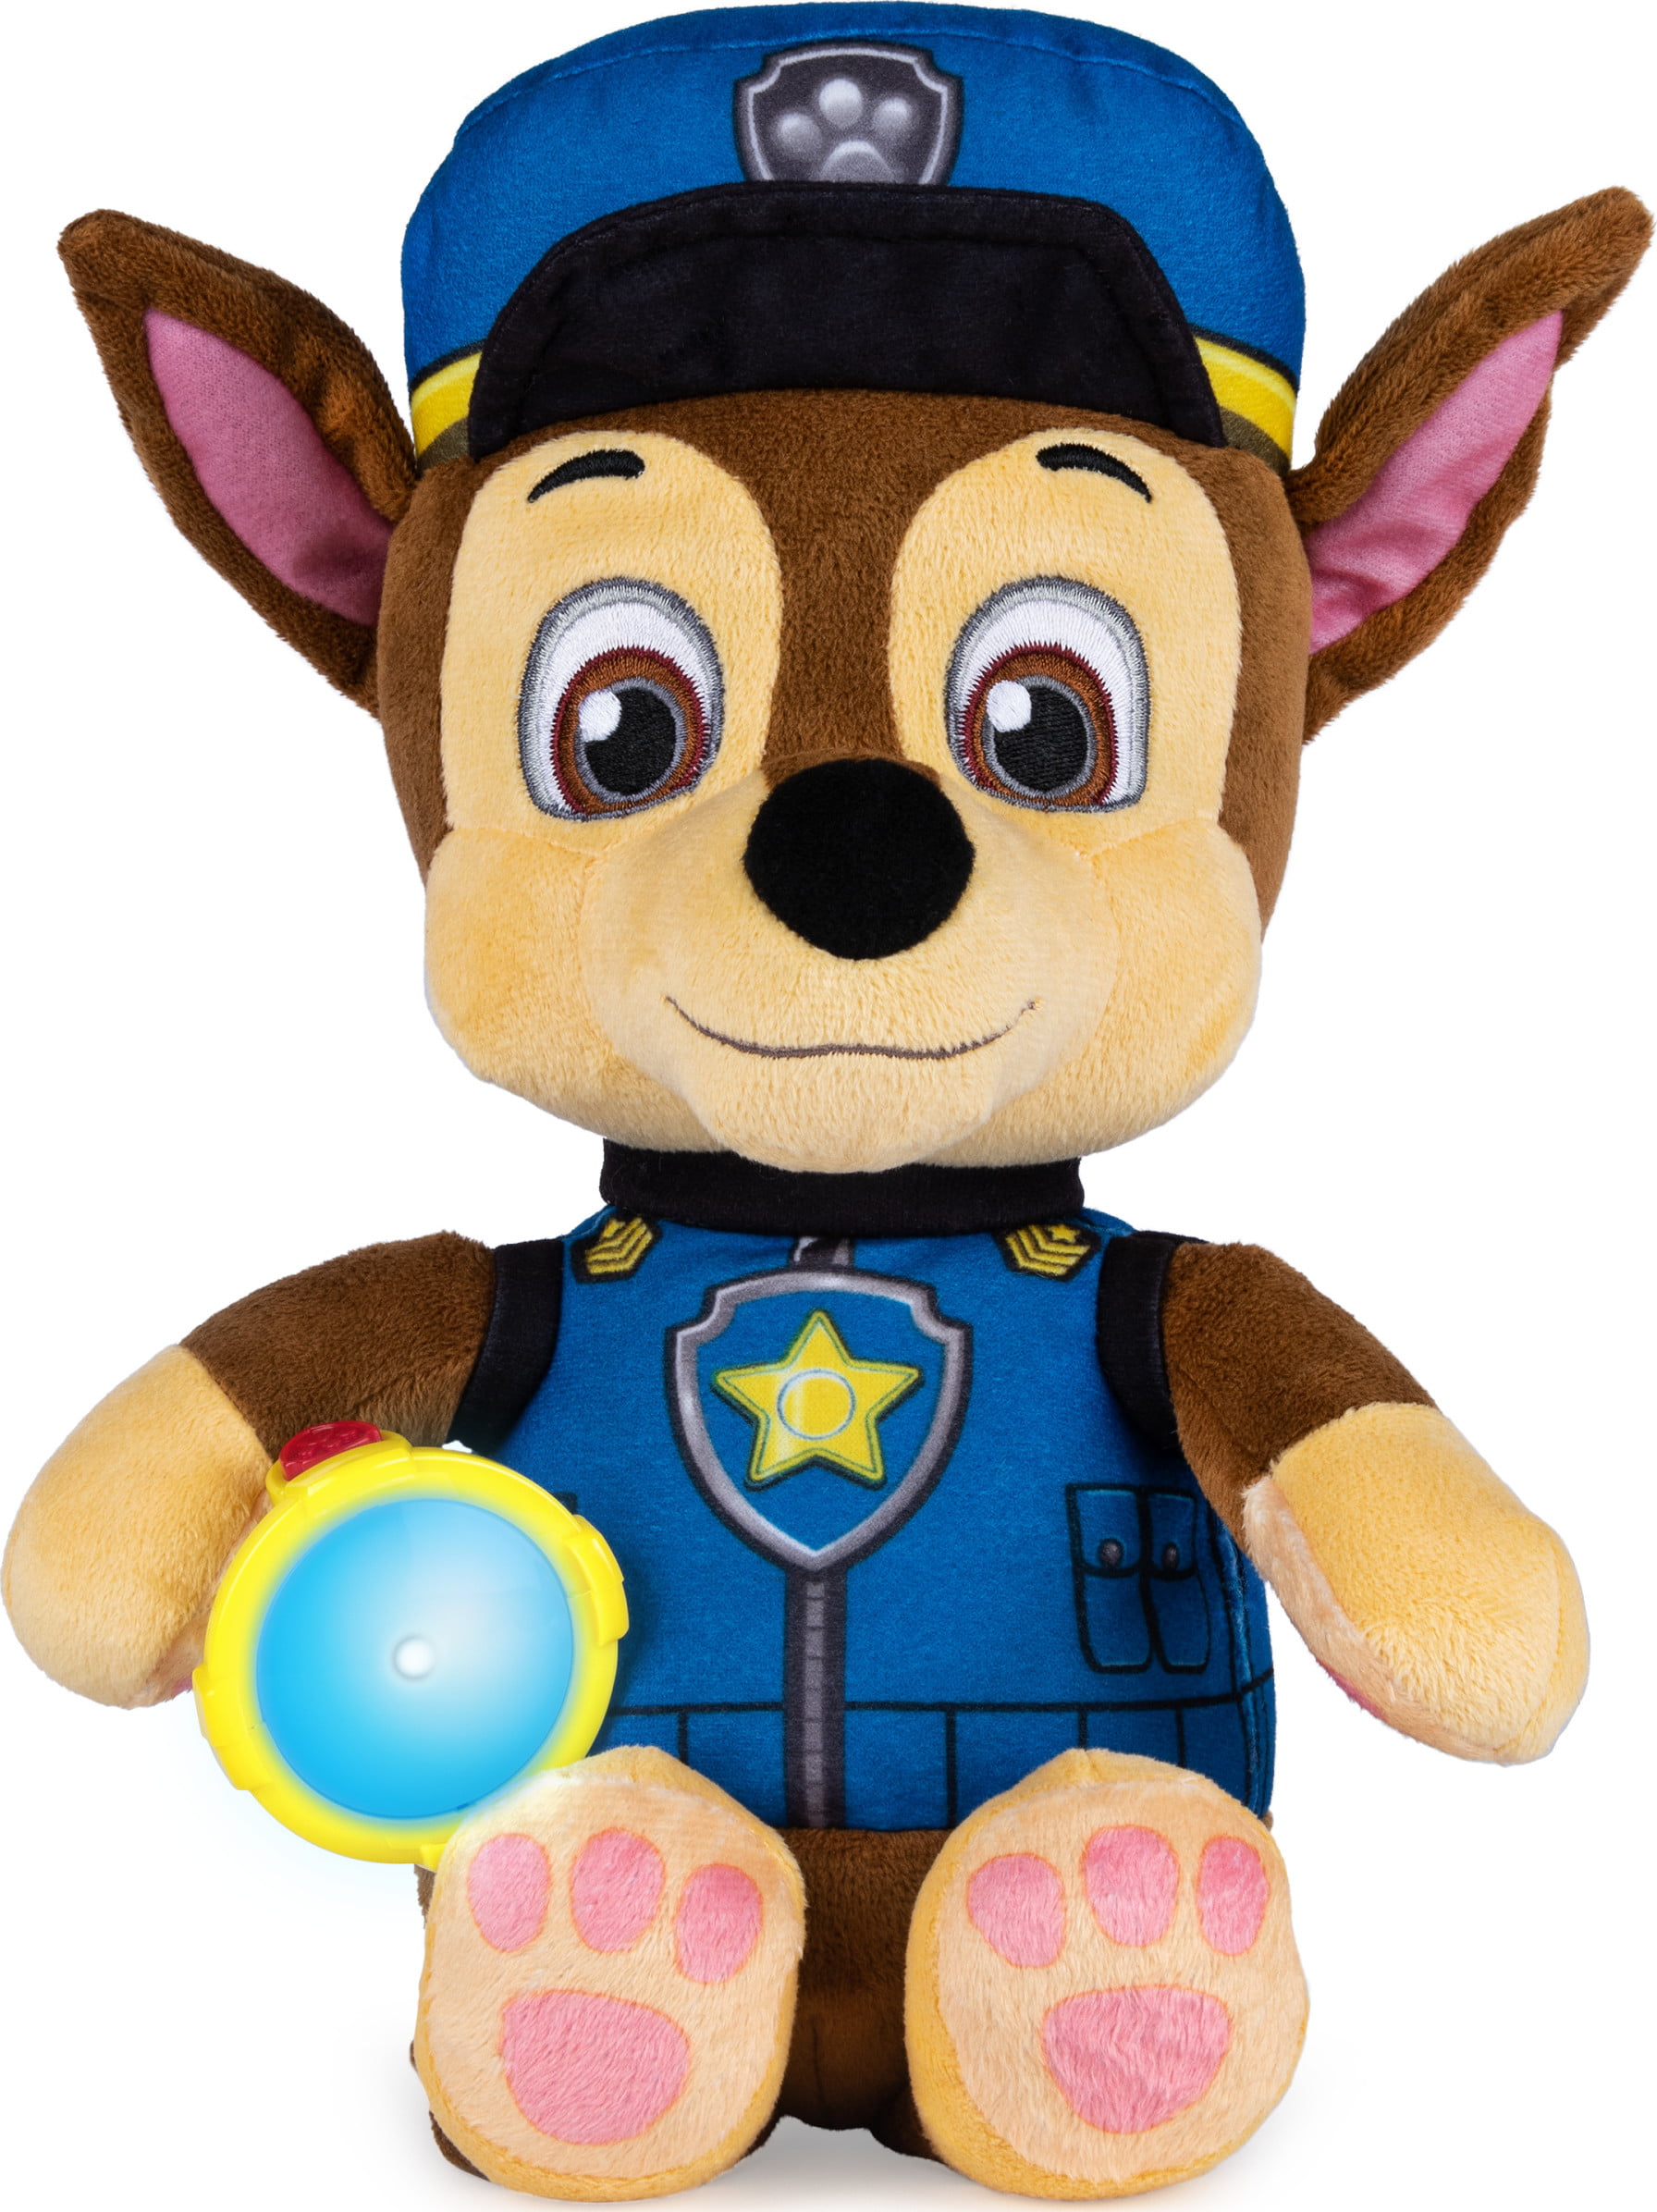 Details about   * NEW Kayleigh & Co. PAW Patrol Snuggle U Pup Chase W/ Flashlight Plush Toy